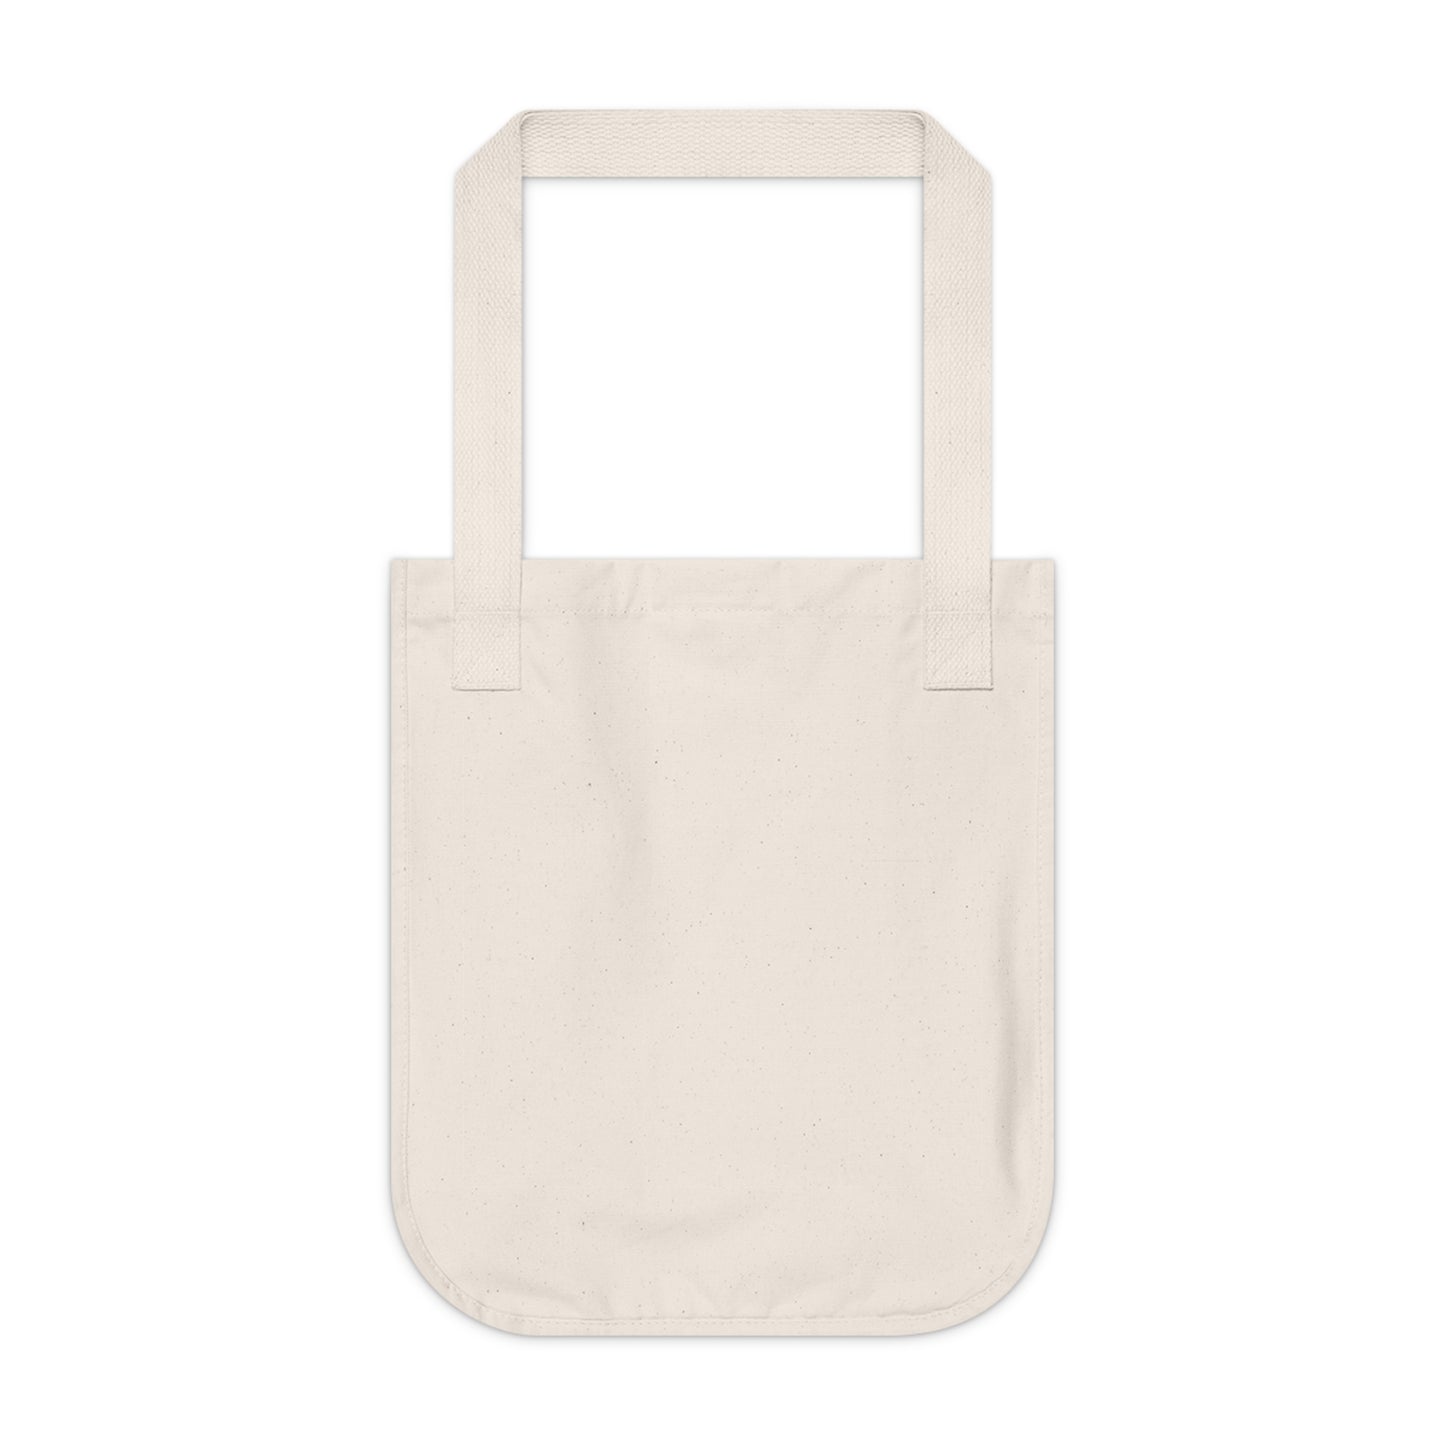 "Nature's Patterns: An Abstract Art Journey" - Bam Boo! Lifestyle Eco-friendly Tote Bag